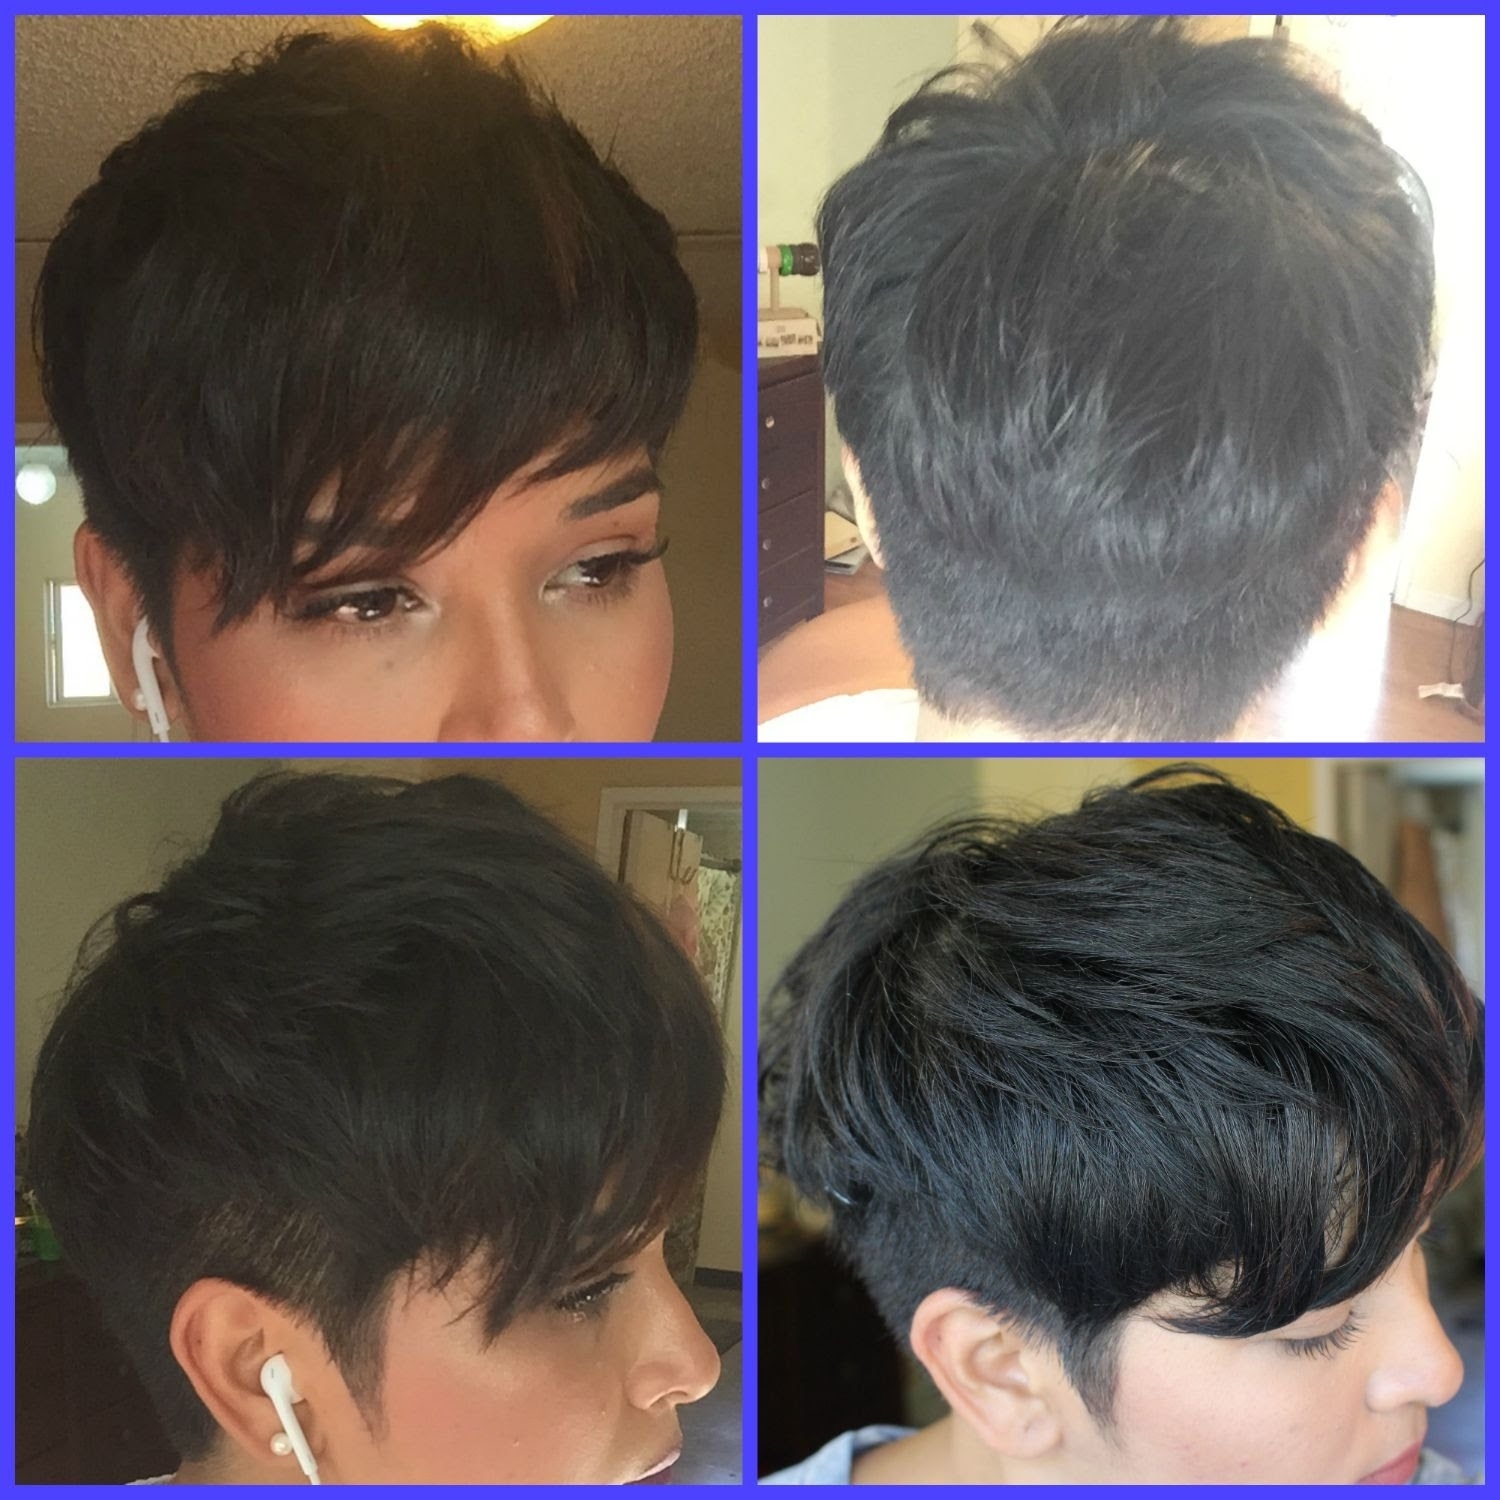 About My Pixie Haircut For Thick Hair The Pixie Diaries - Youtube intended for Pixie Haircut For Thick Coarse Hair